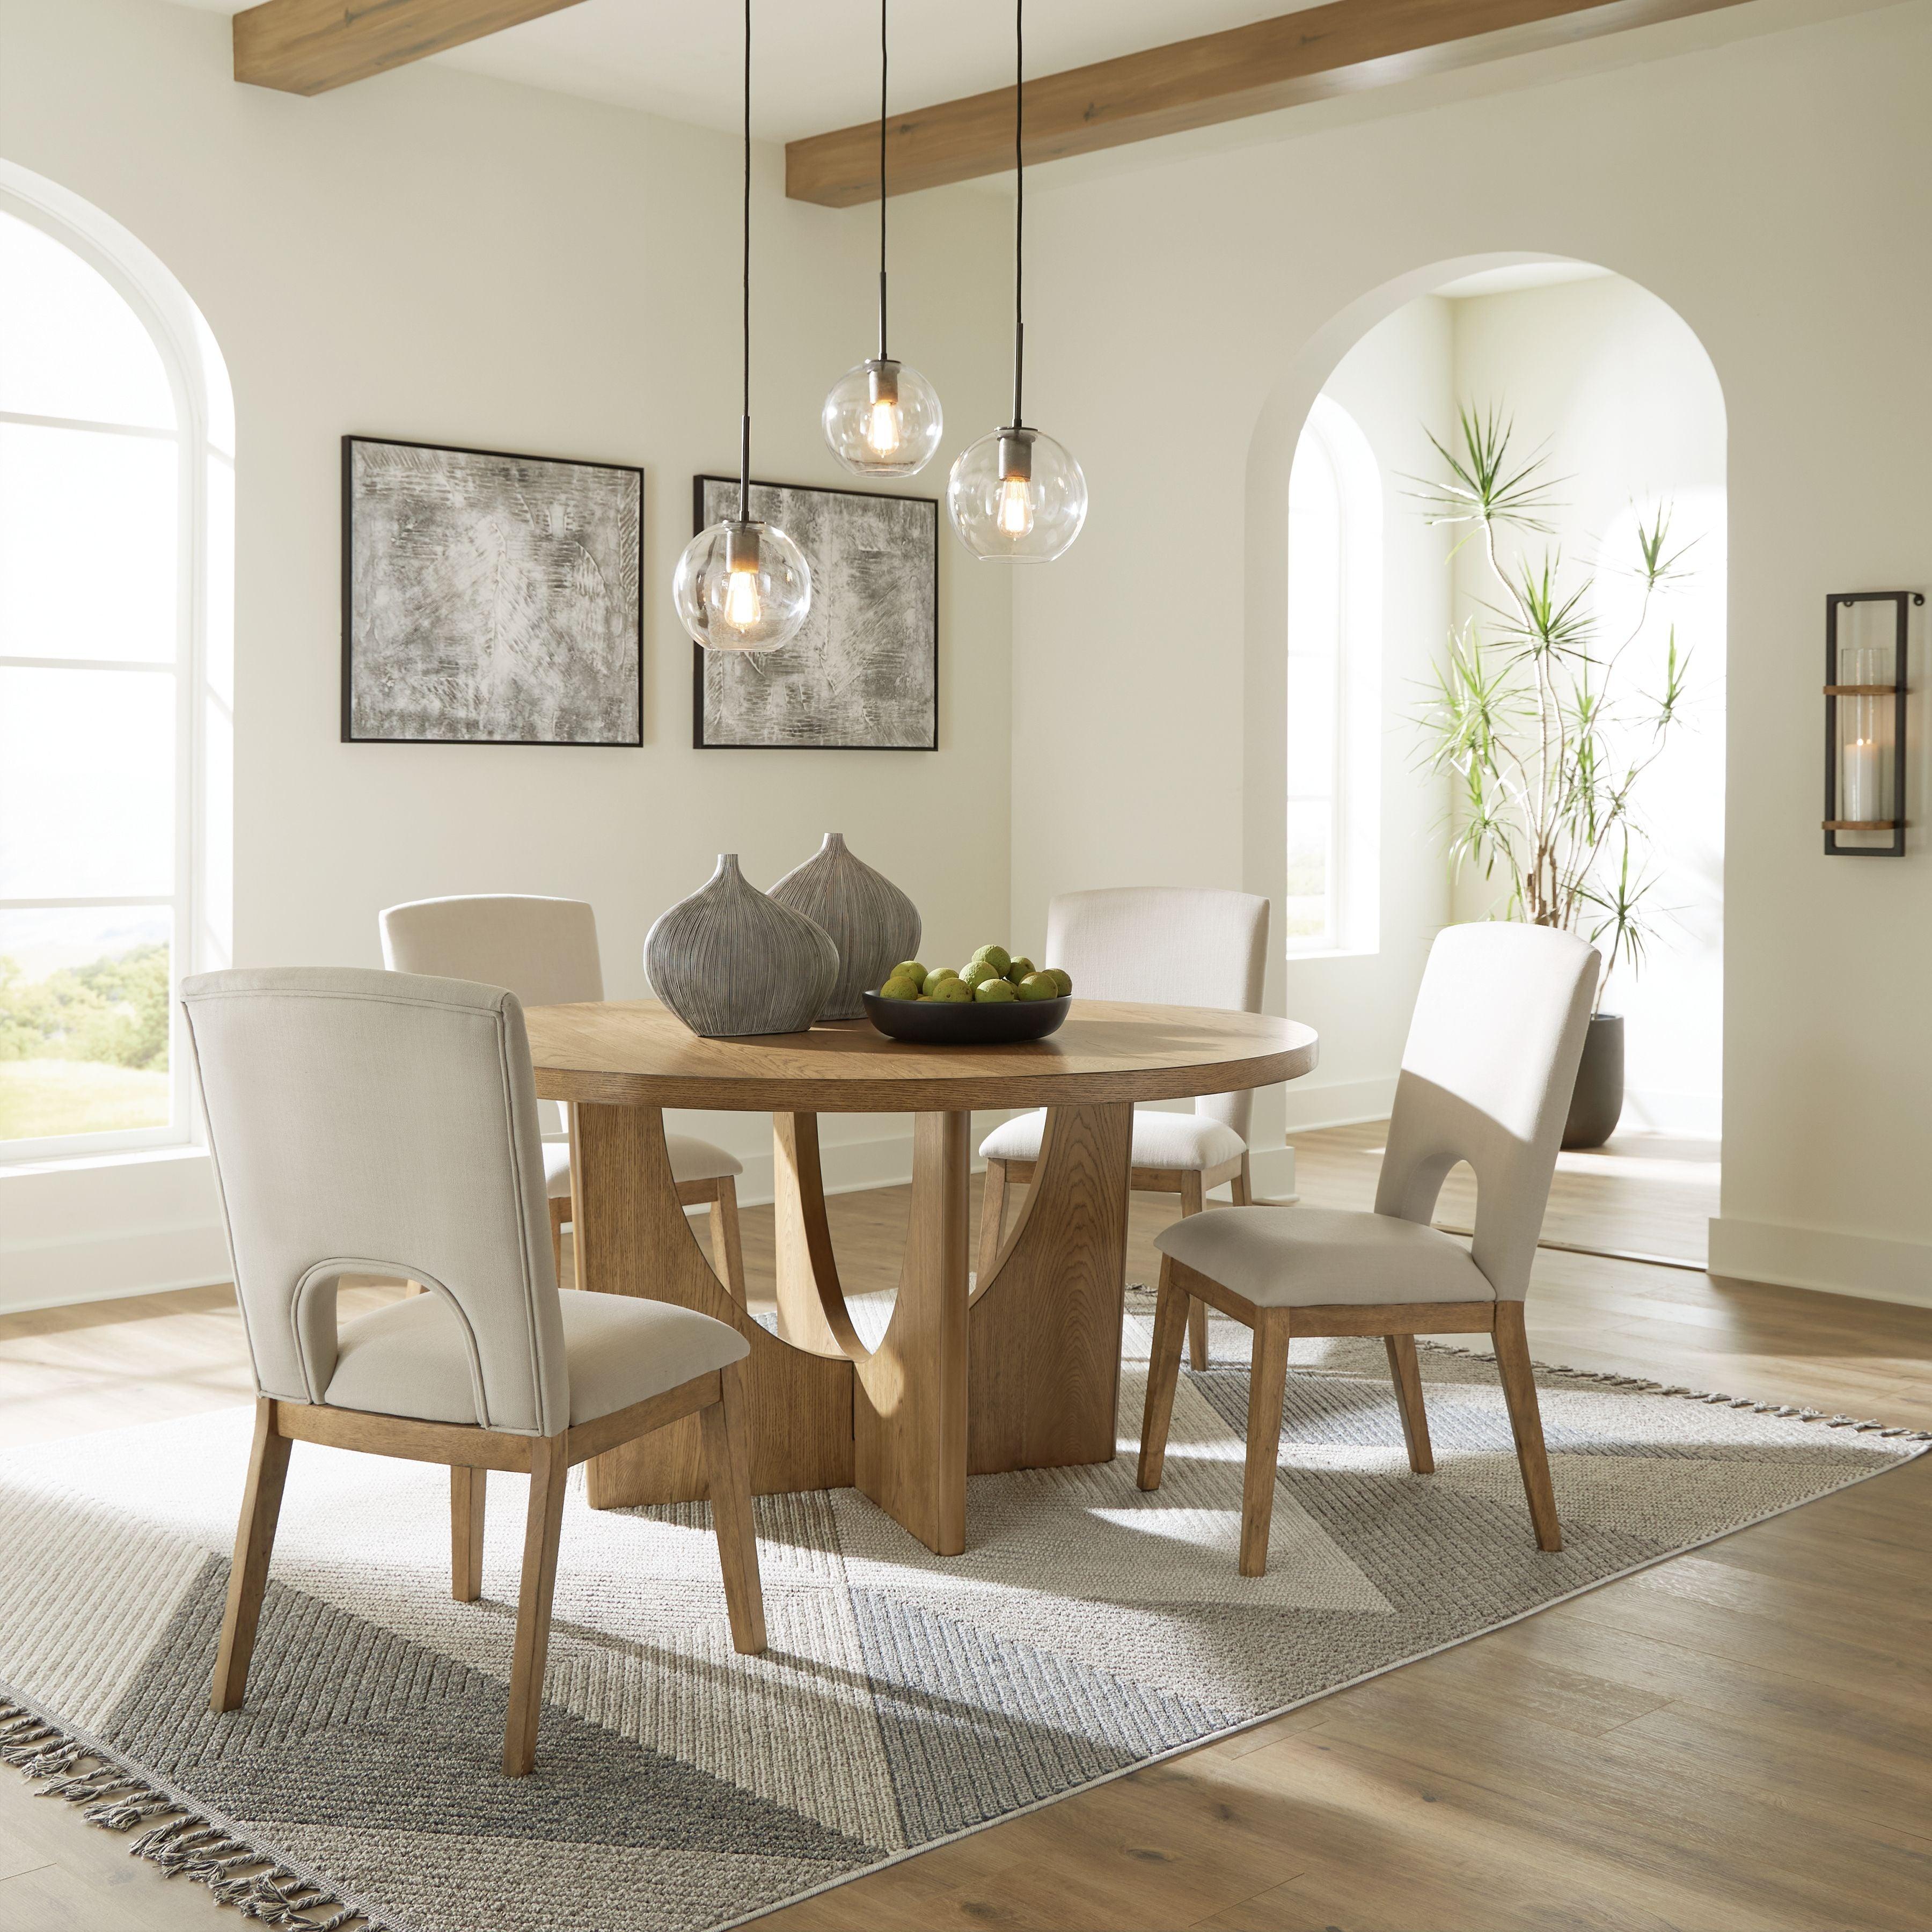 Signature Design by Ashley® - Dakmore - Brown - 5 Pc. - Dining Room Table, 4 Side Chairs - 5th Avenue Furniture